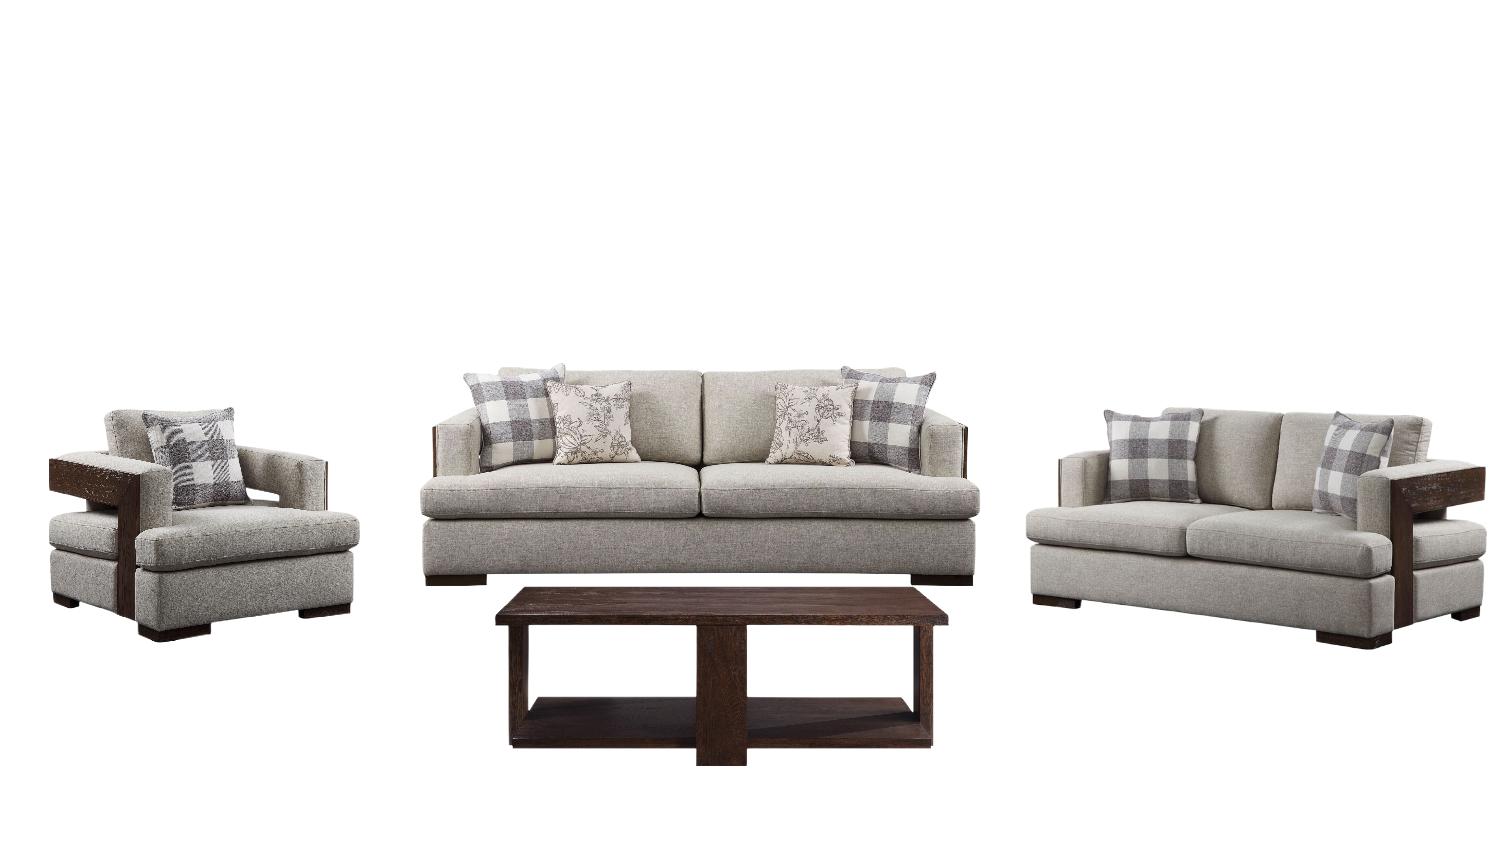 Transitional Sofa Loveseat Chair and Coffee Table Niamey 54850-4pcs in Beige Fabric